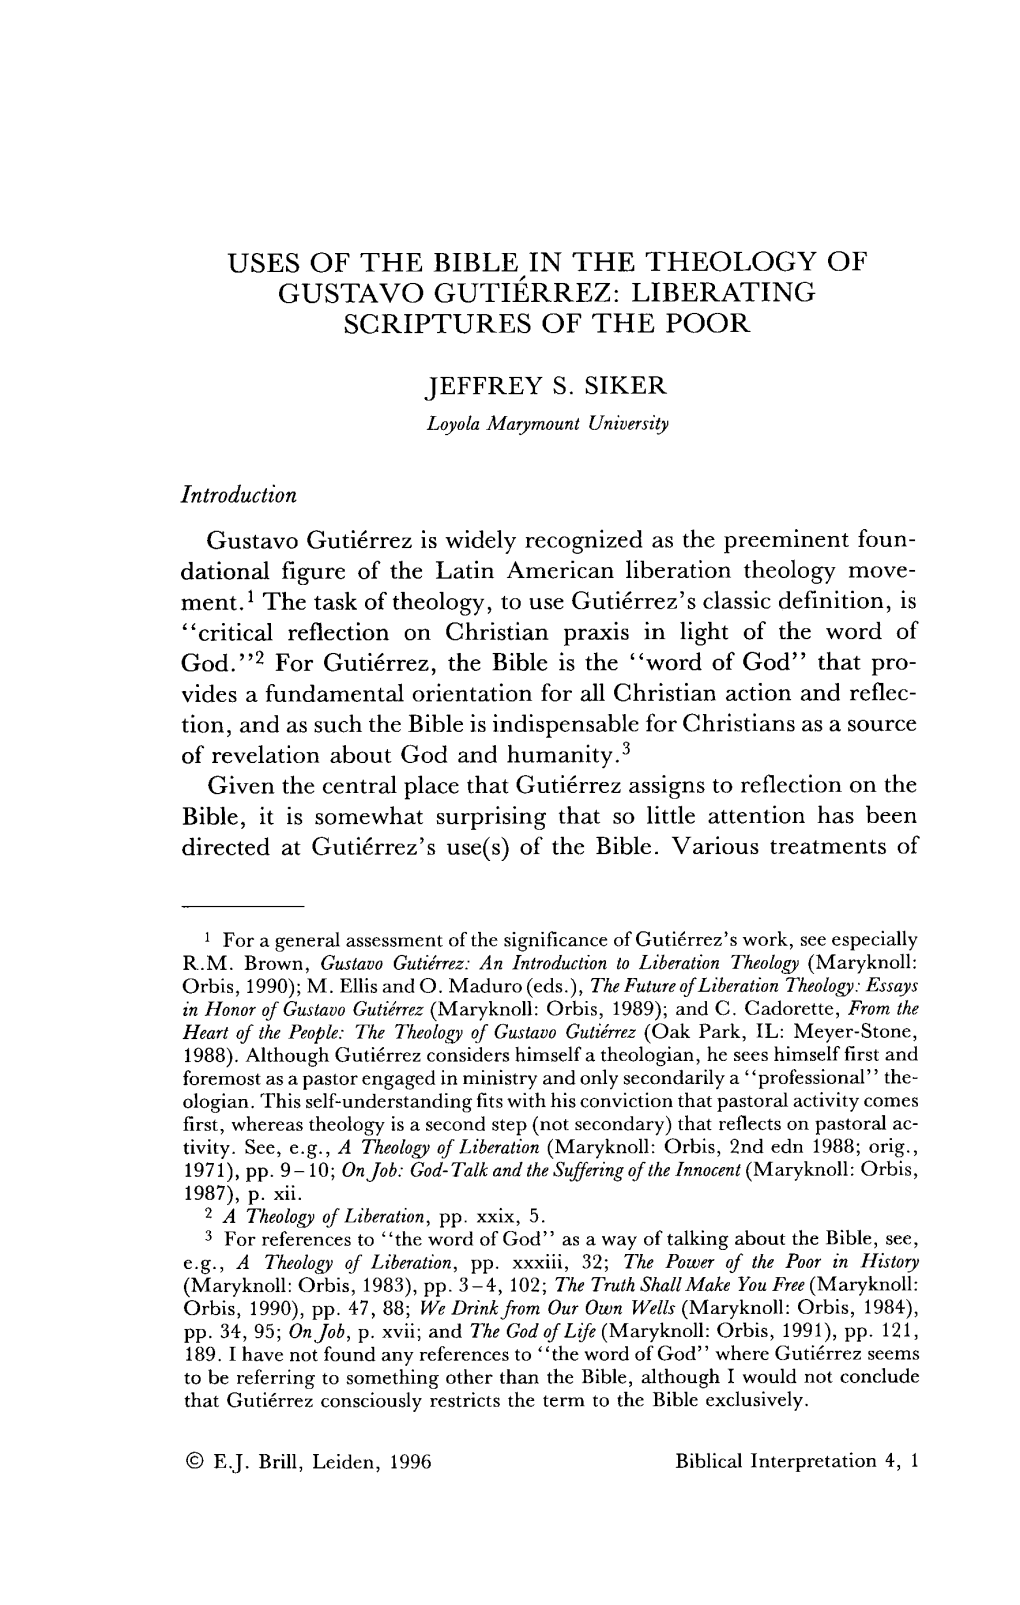 Uses of the Bible in the Theology of Gustavo Gutierrez: Liberating Scriptures of the Poor